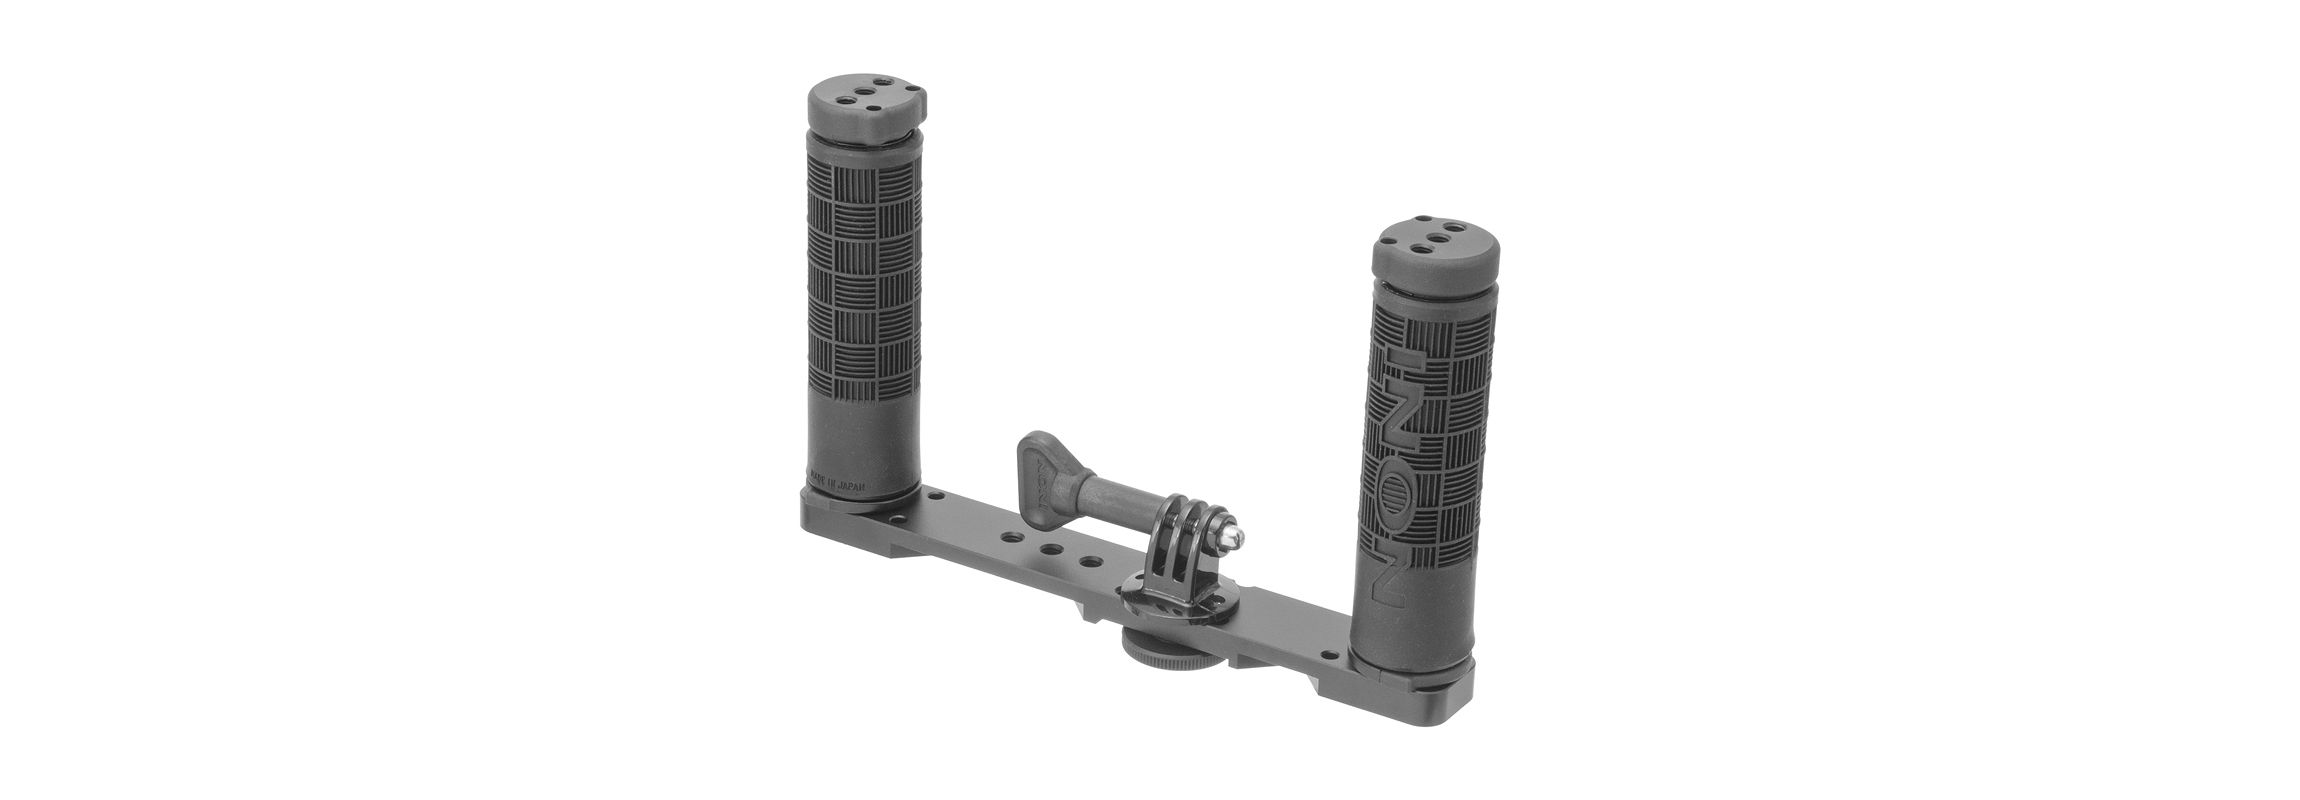 Compact Grip Base for GoPro